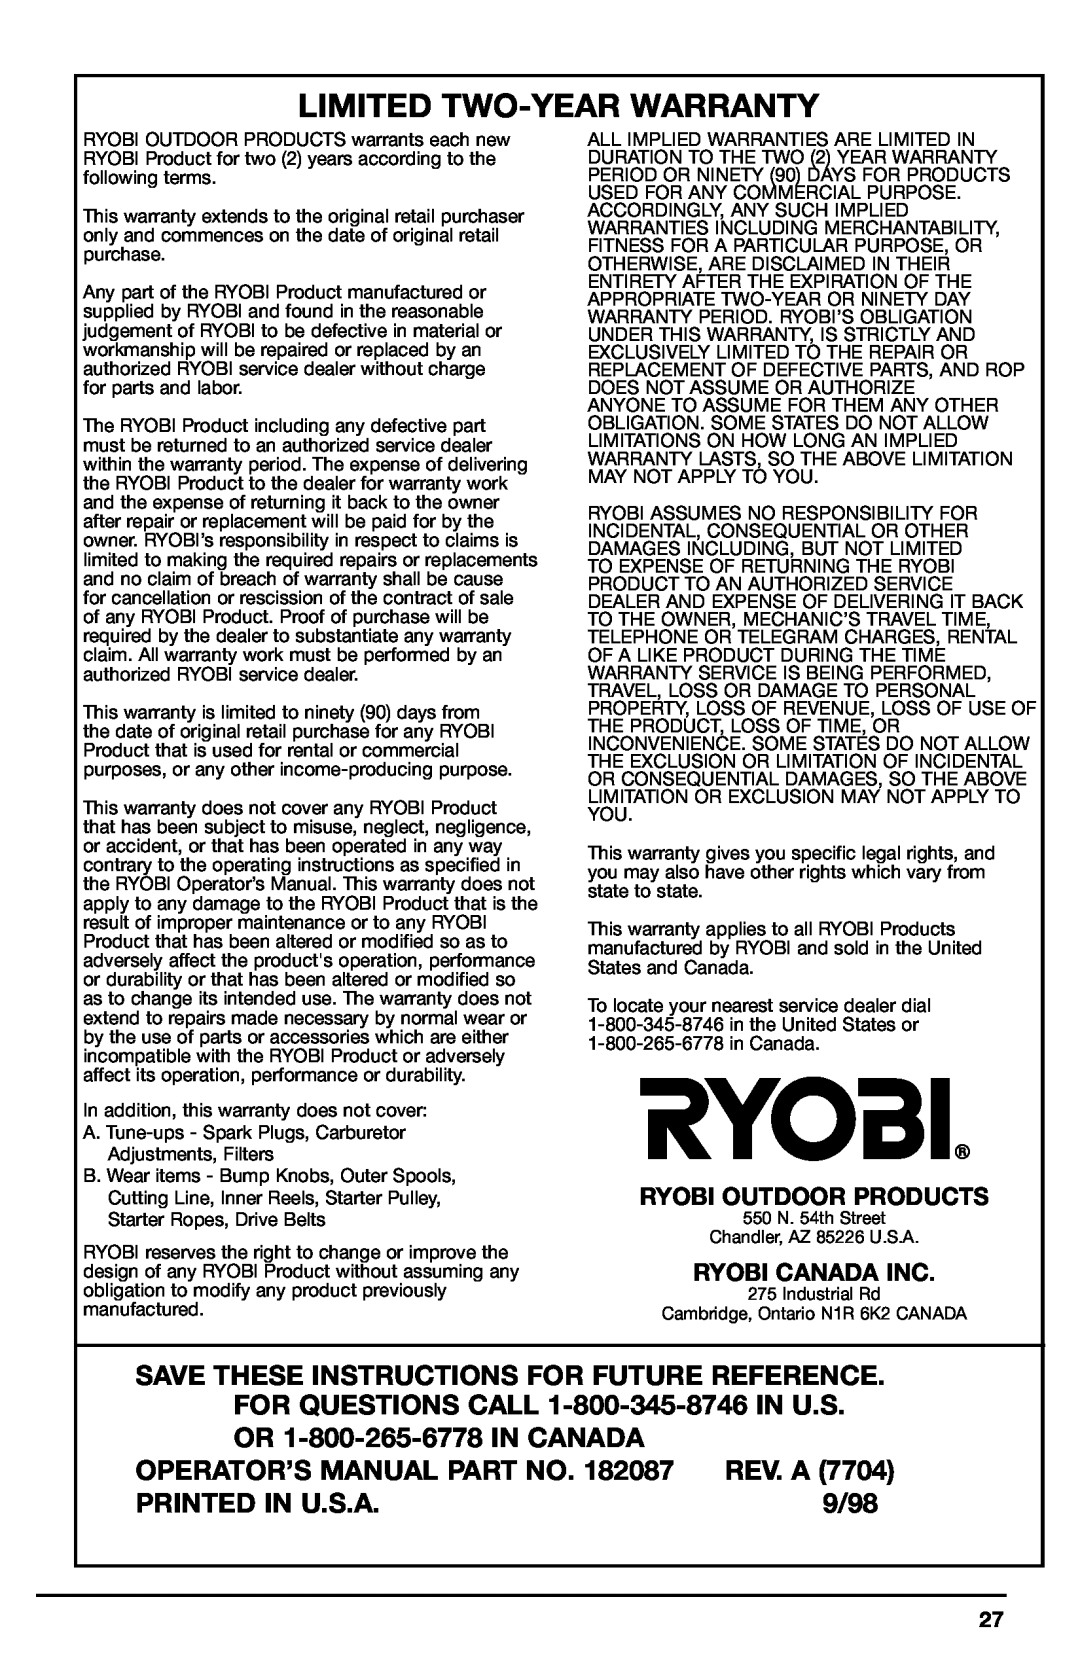 Ryobi 700r manual Limited Two-Year Warranty, OR 1-800-265-6778 IN CANADA, Operator’S Manual Part No, Rev. A, 9/98 